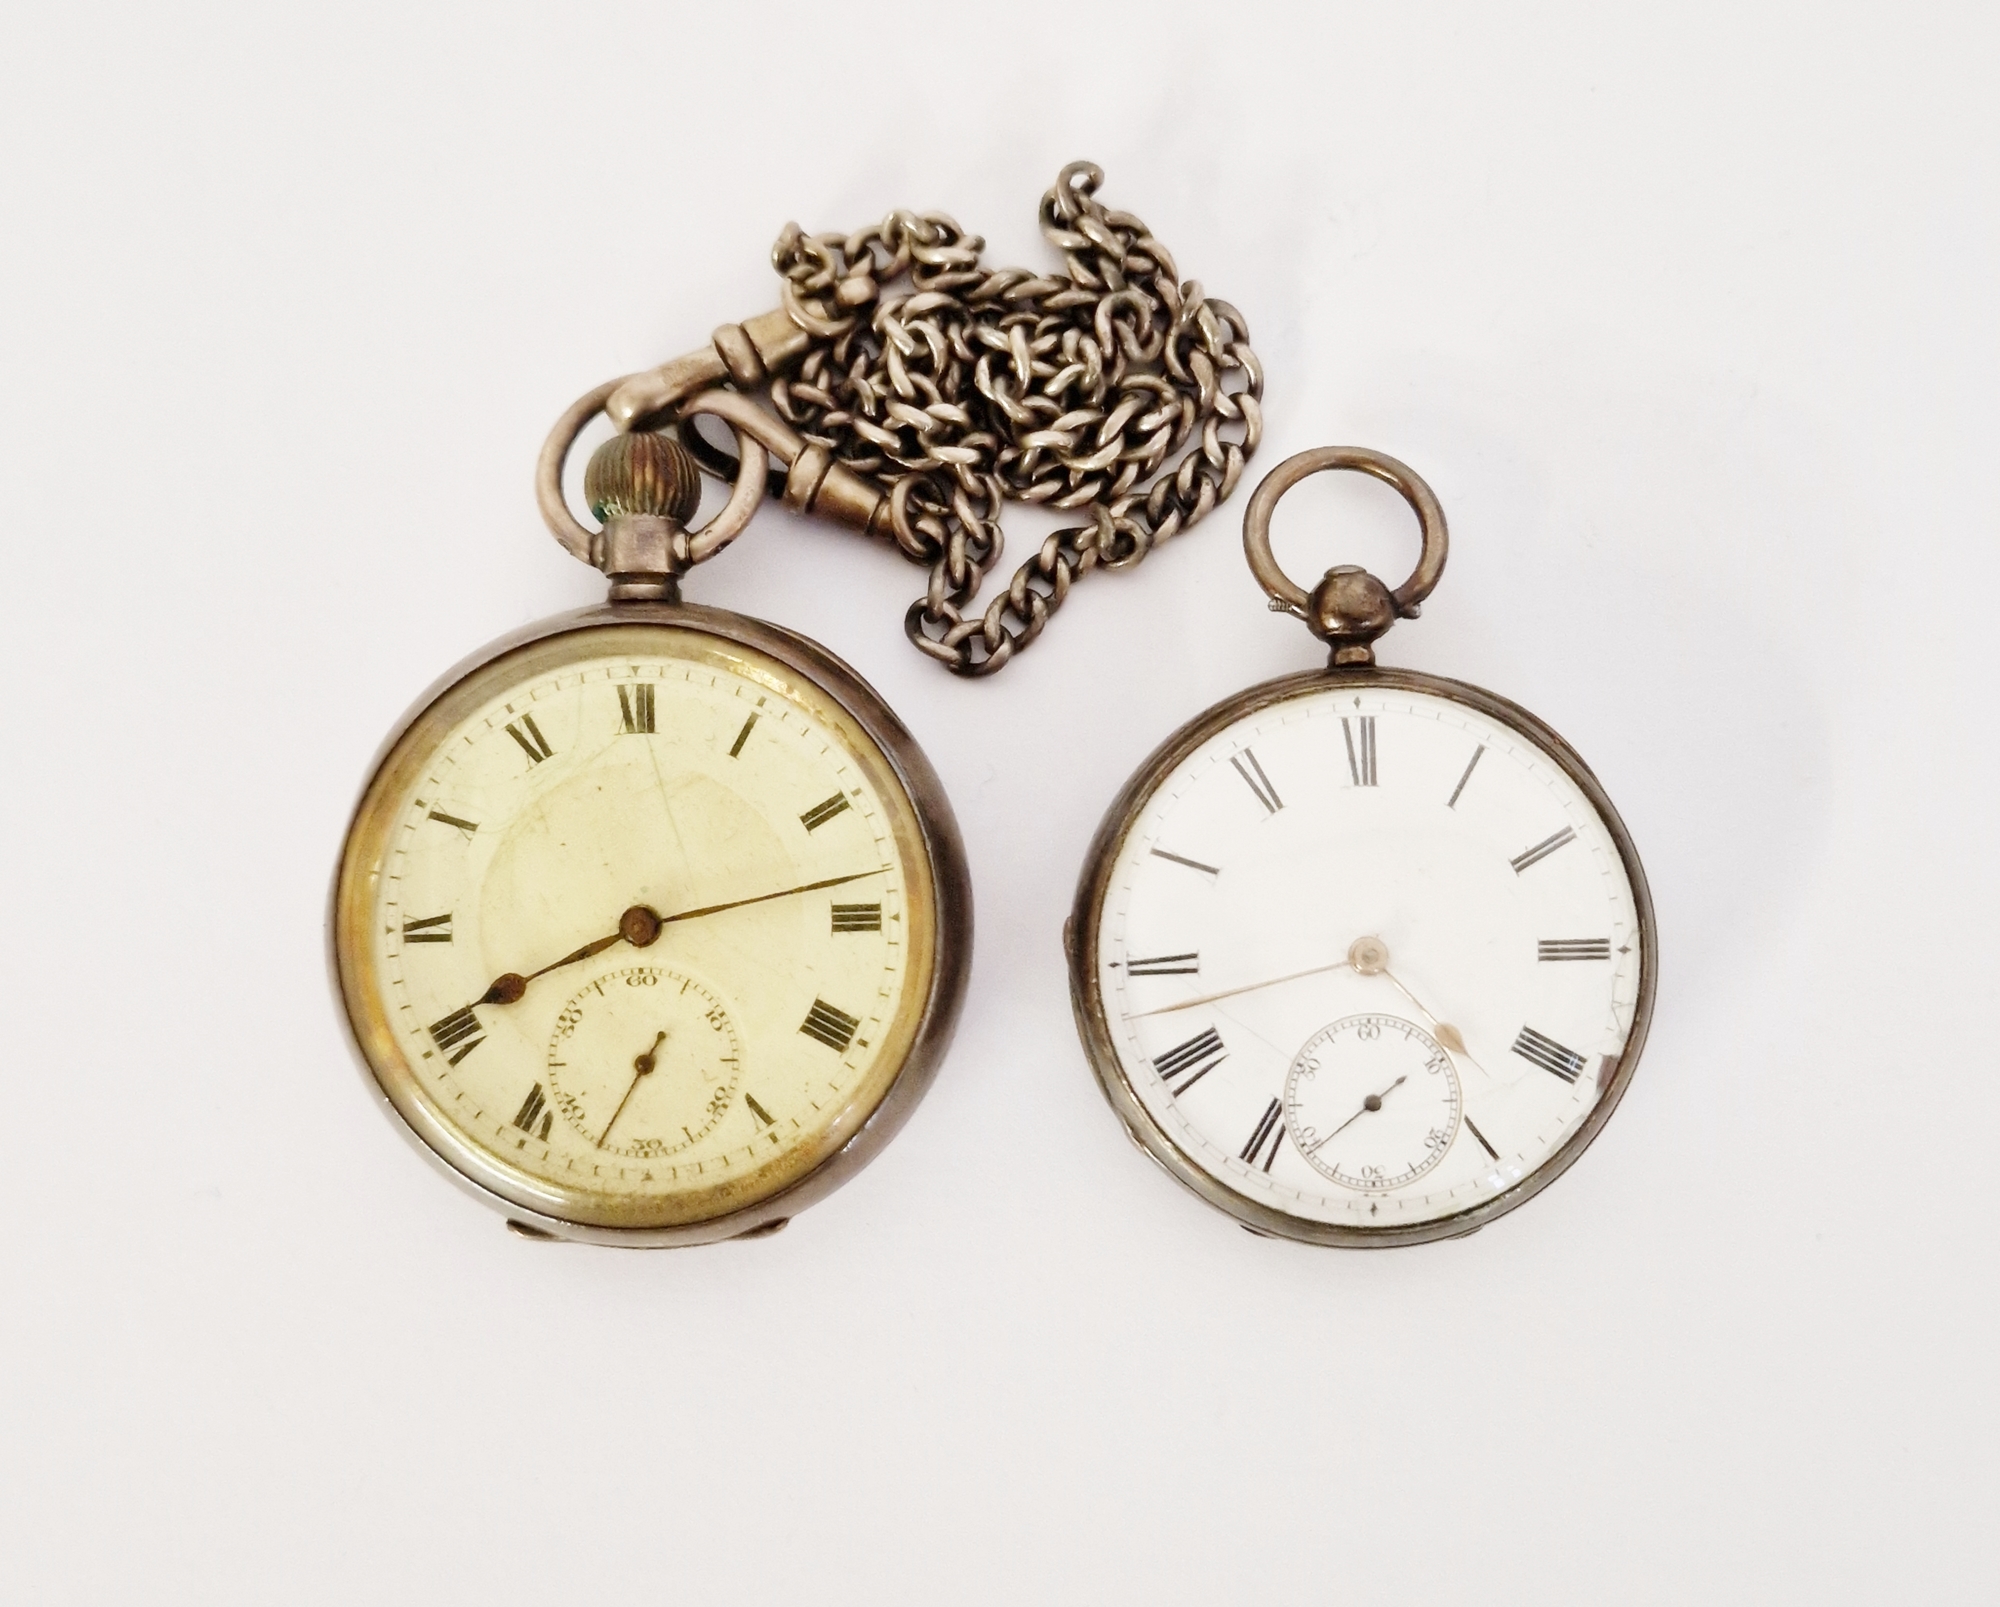 Victorian silver-cased open-faced pocket watch, the enamel dial having Roman numerals denoting hours